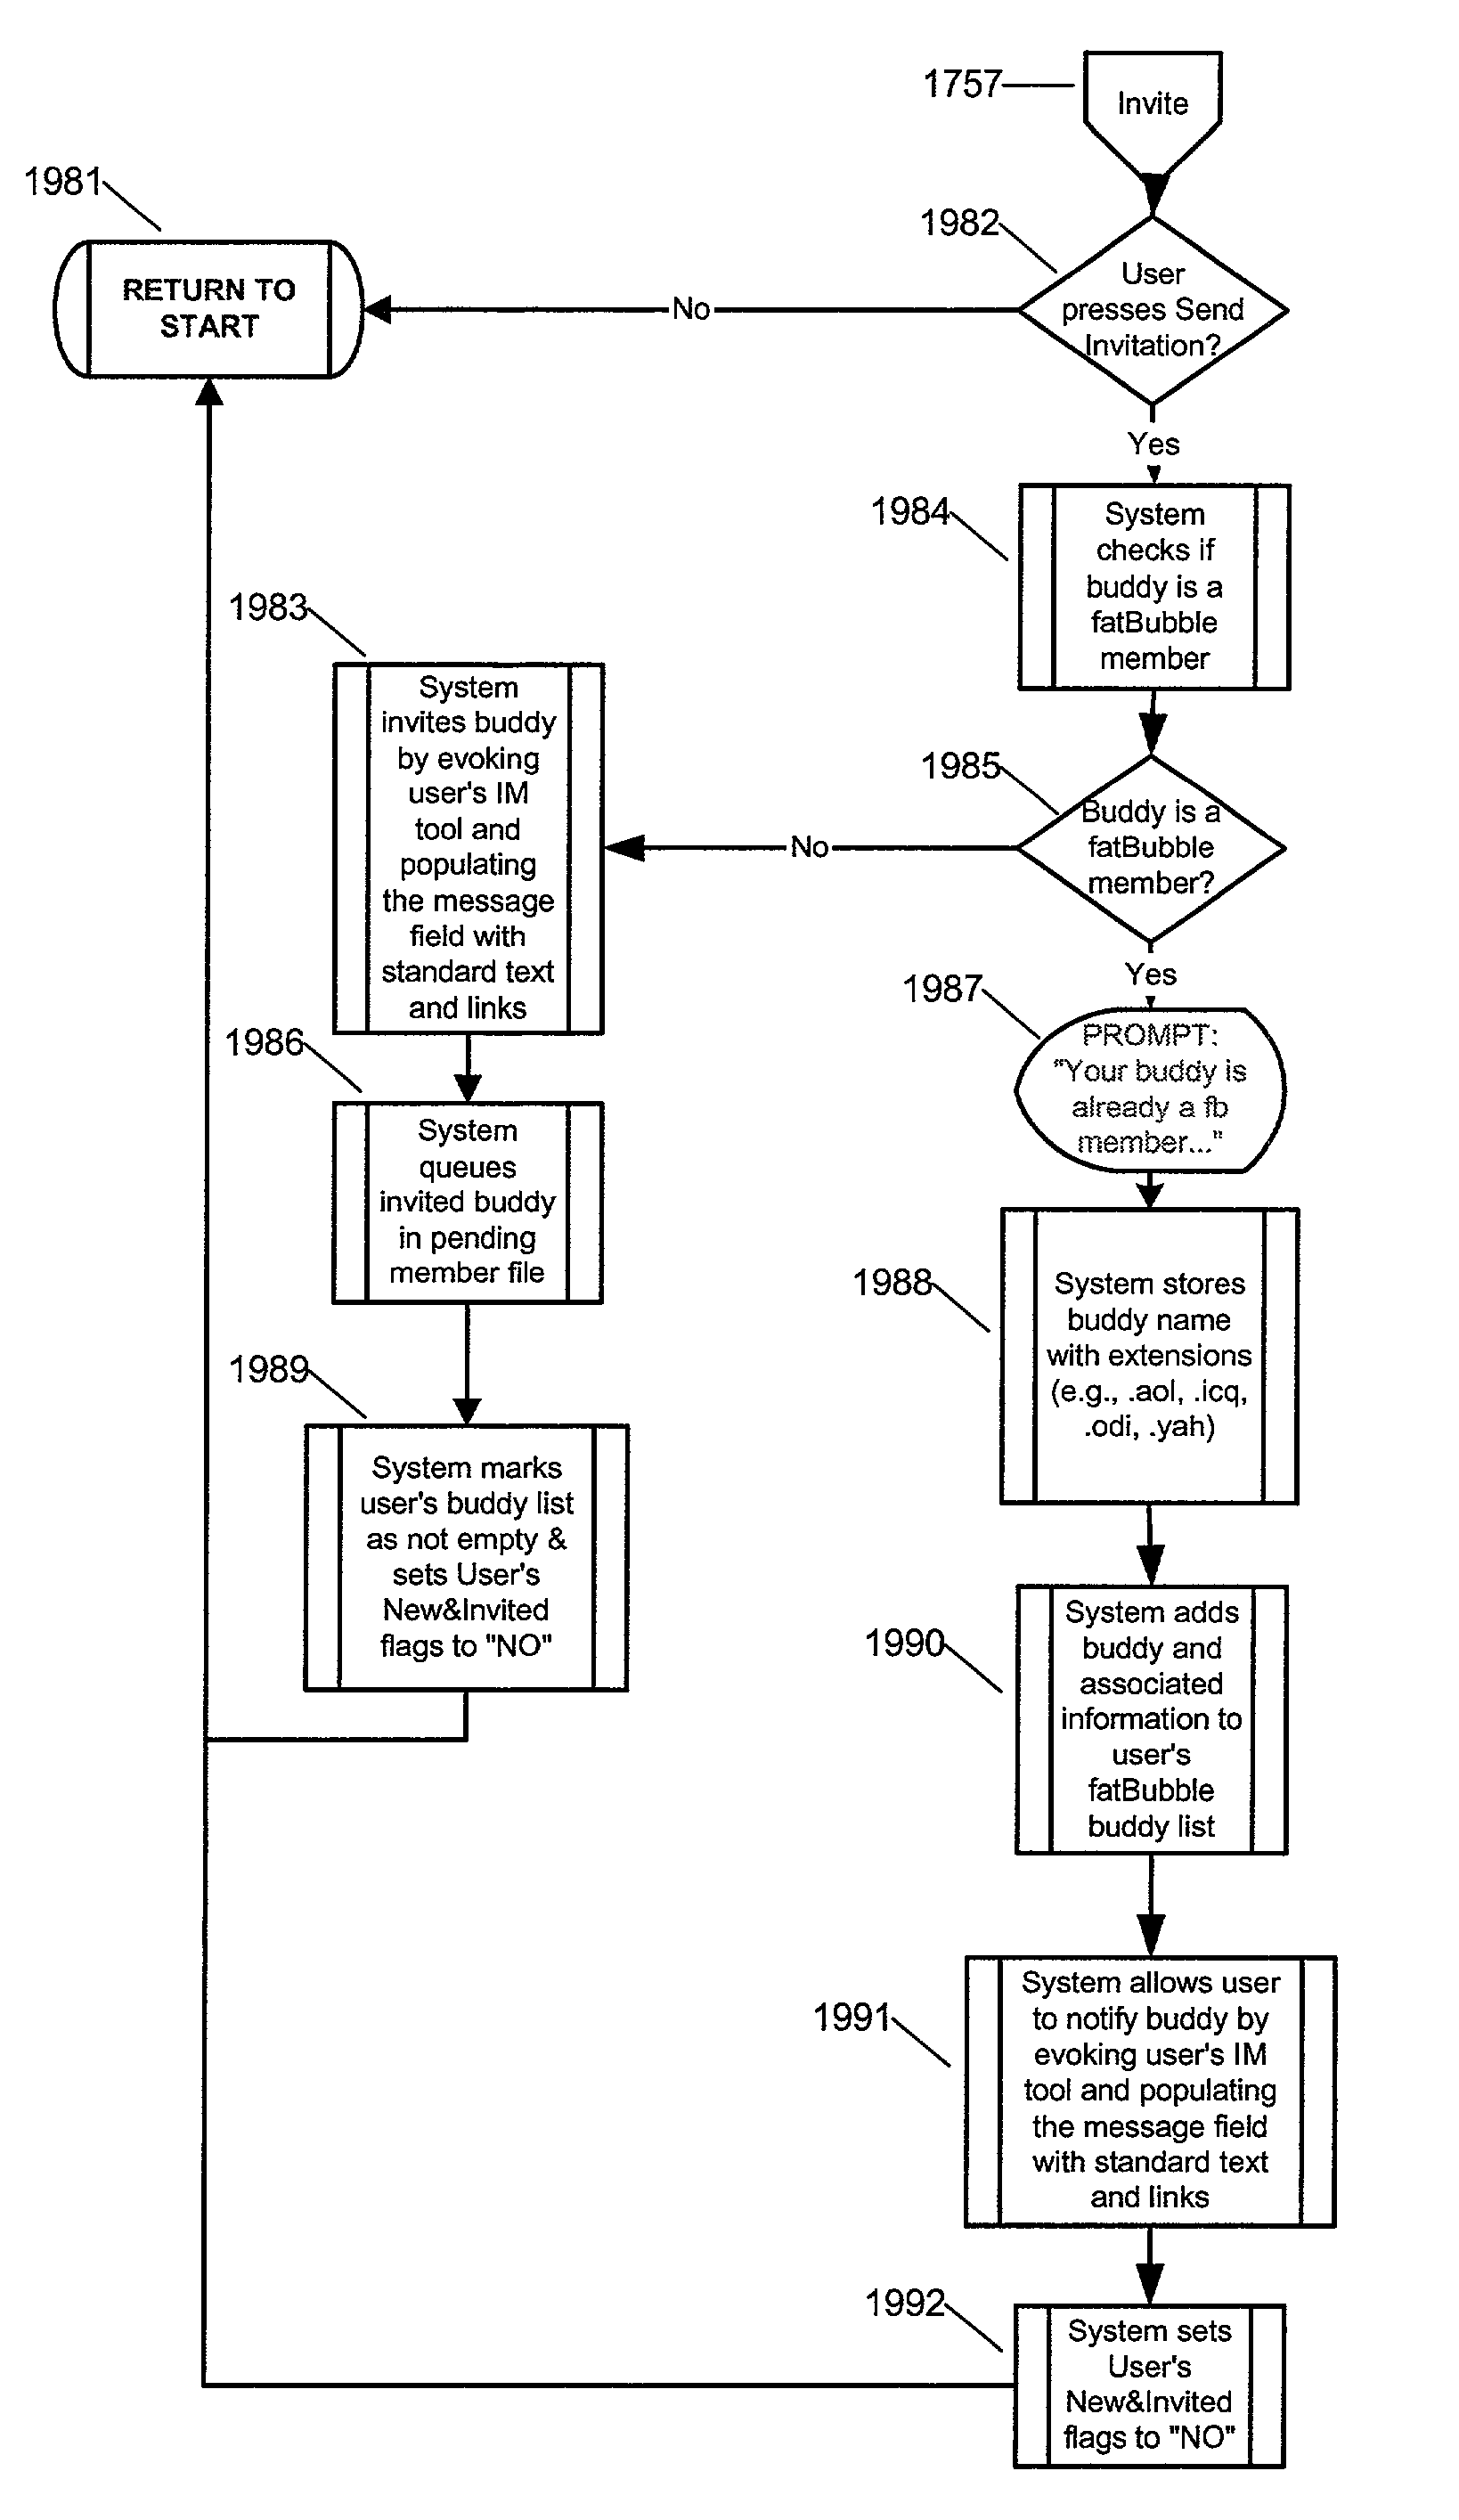 Method and apparatus for selectively sharing and passively tracking communication device experiences